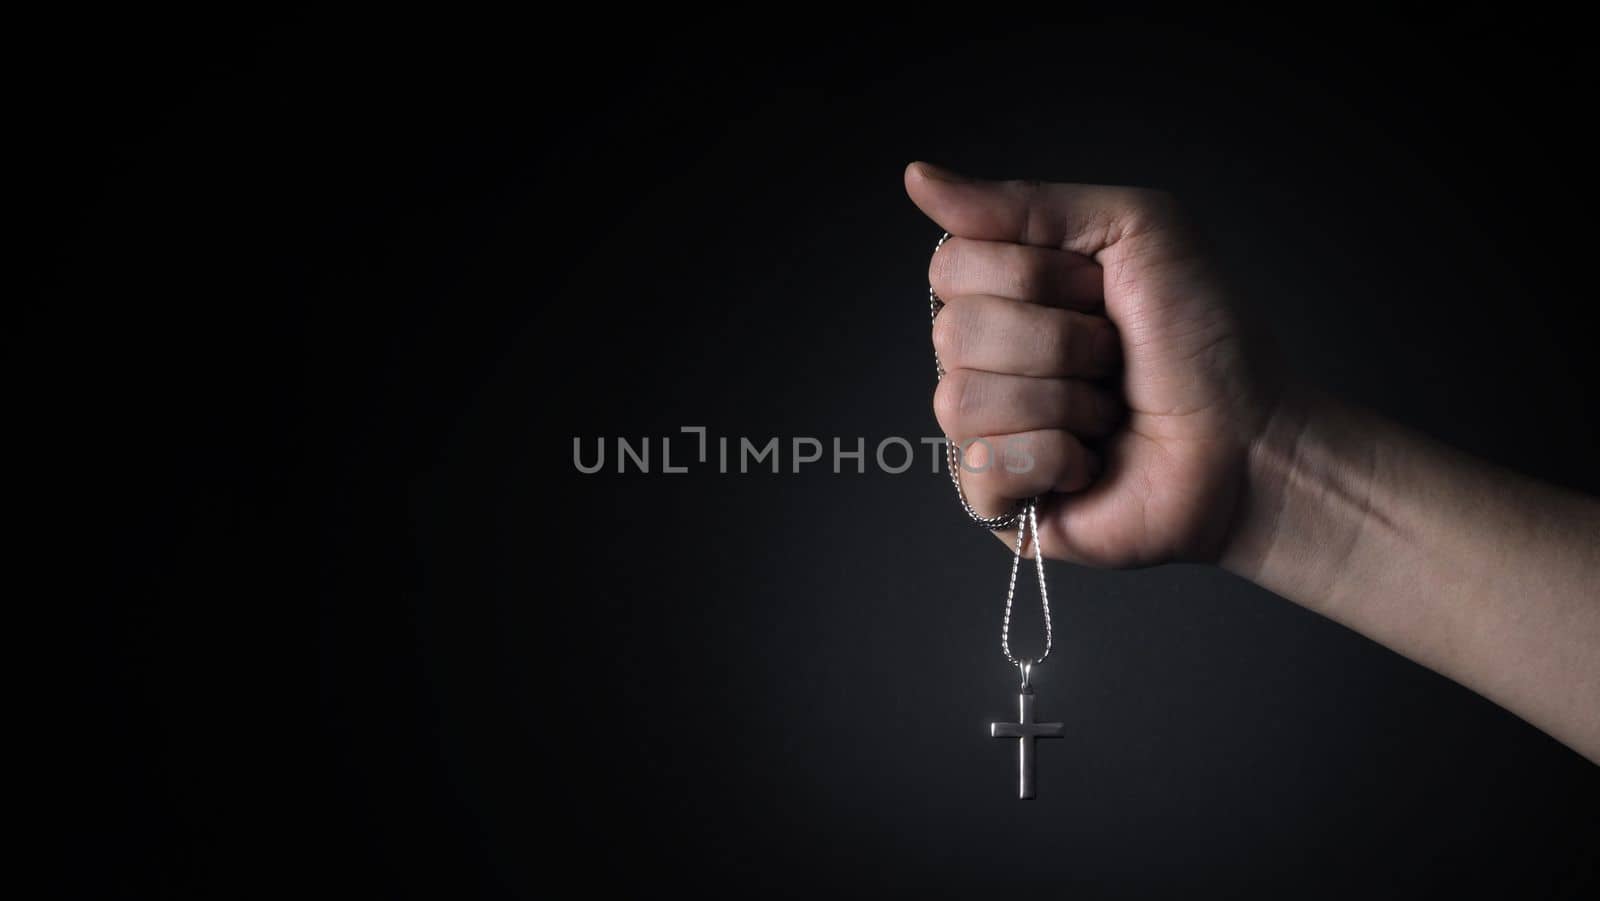 Close-up images of crucifix pendant and necklace in hand  by gnepphoto